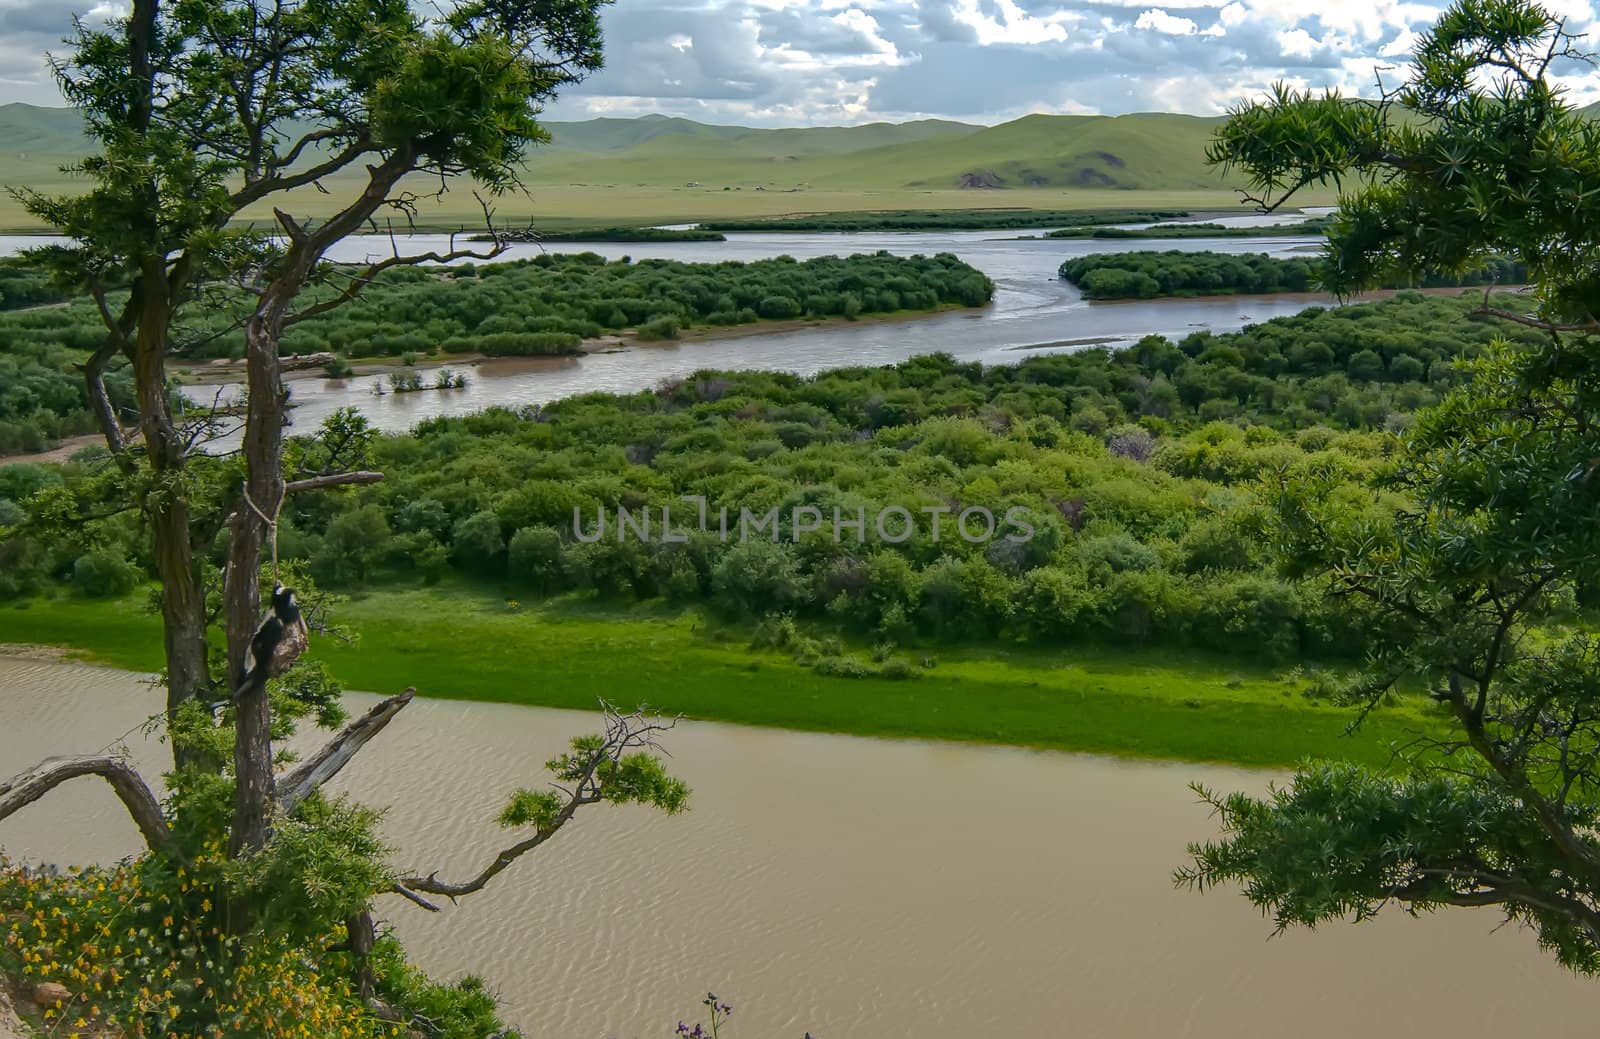 China Yellow River wetland by xfdly5